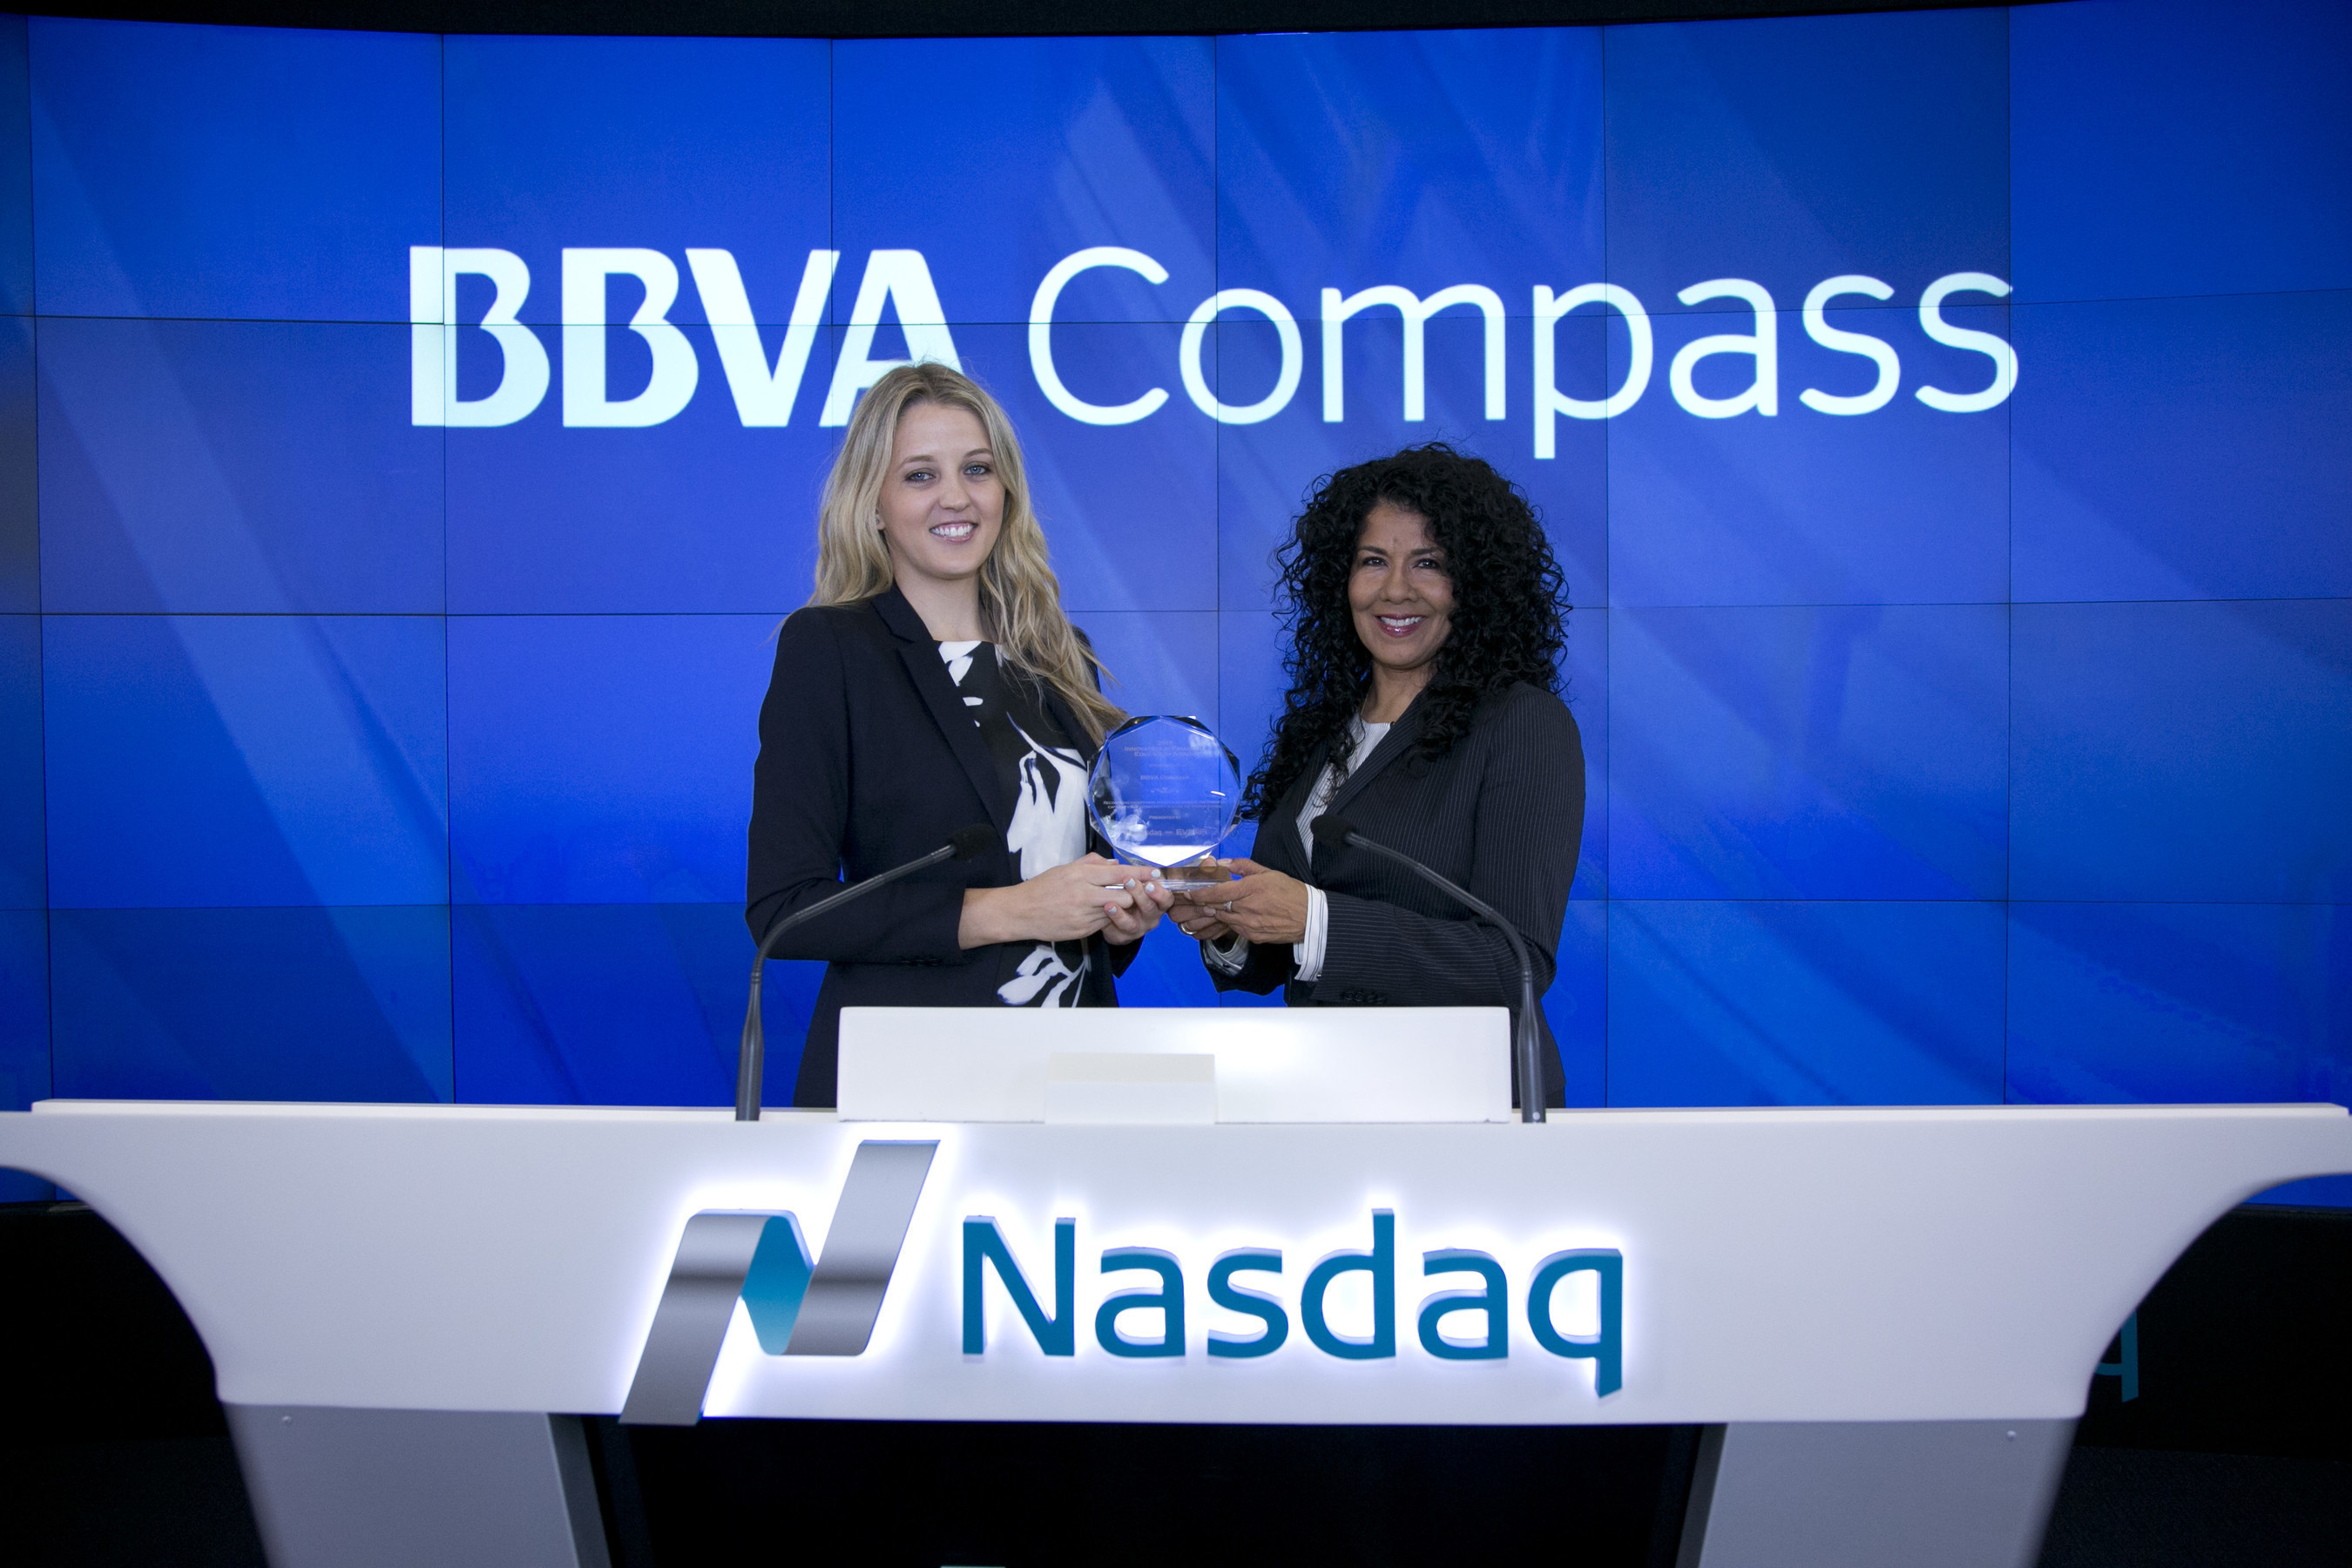 BBVA Compass was honored with the Innovation in Financial Education Award by Nasdaq and EverFi for its significant efforts to improve the financial capability of young Americans.